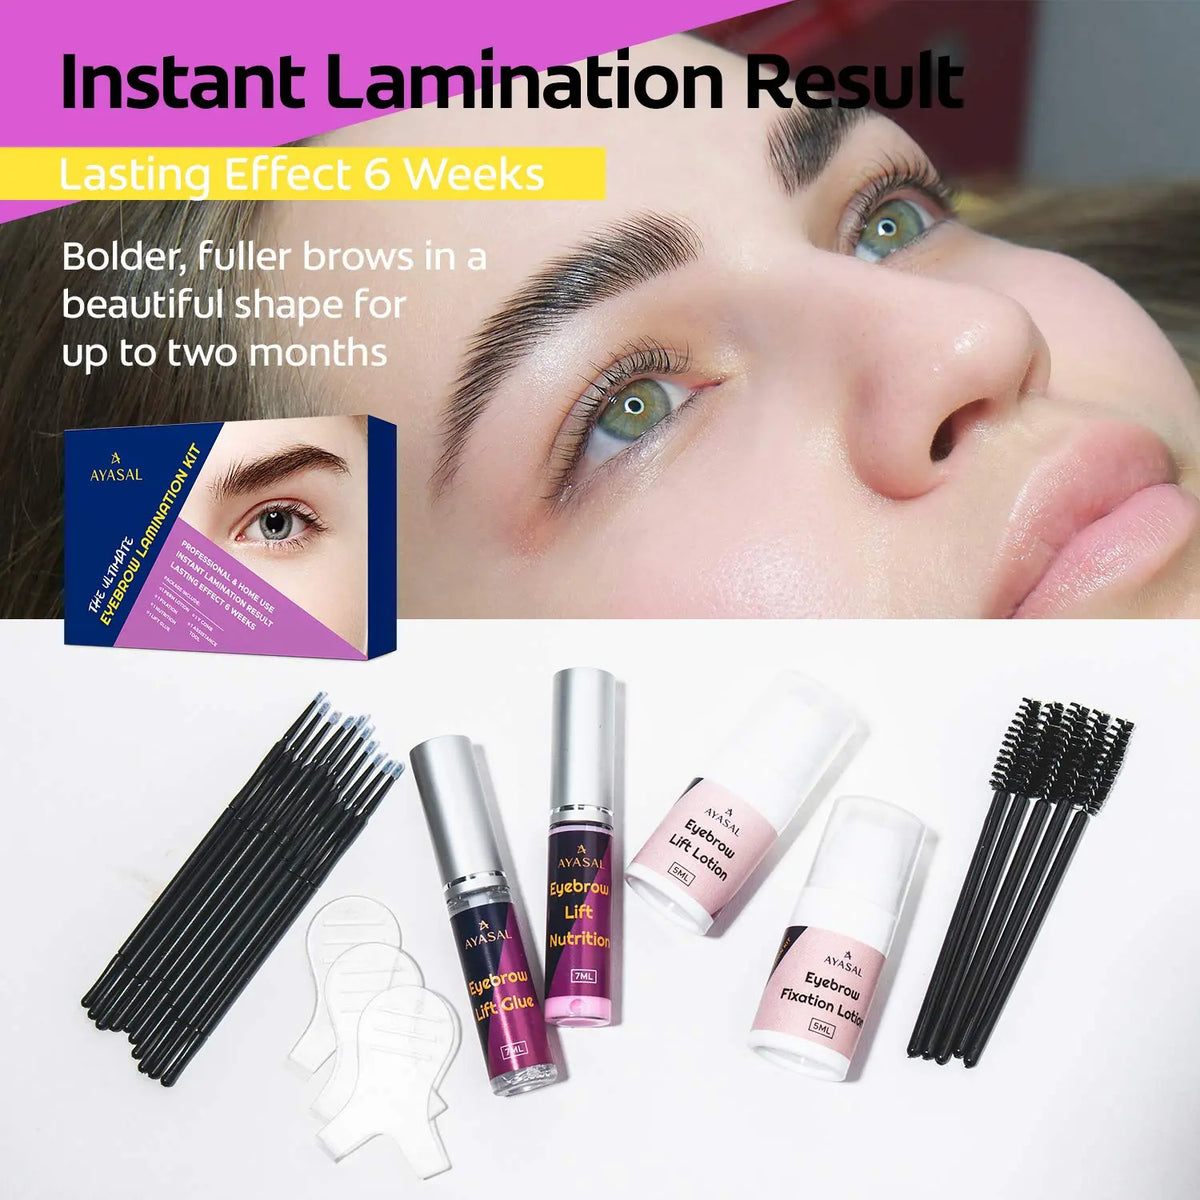 AYASAL Eyebrow Lamination Kit, Great Eyebrow Lift Kit, DIY Perm For Your Brows, Instant Professional Lift For Fuller Eyebrows AYASAL